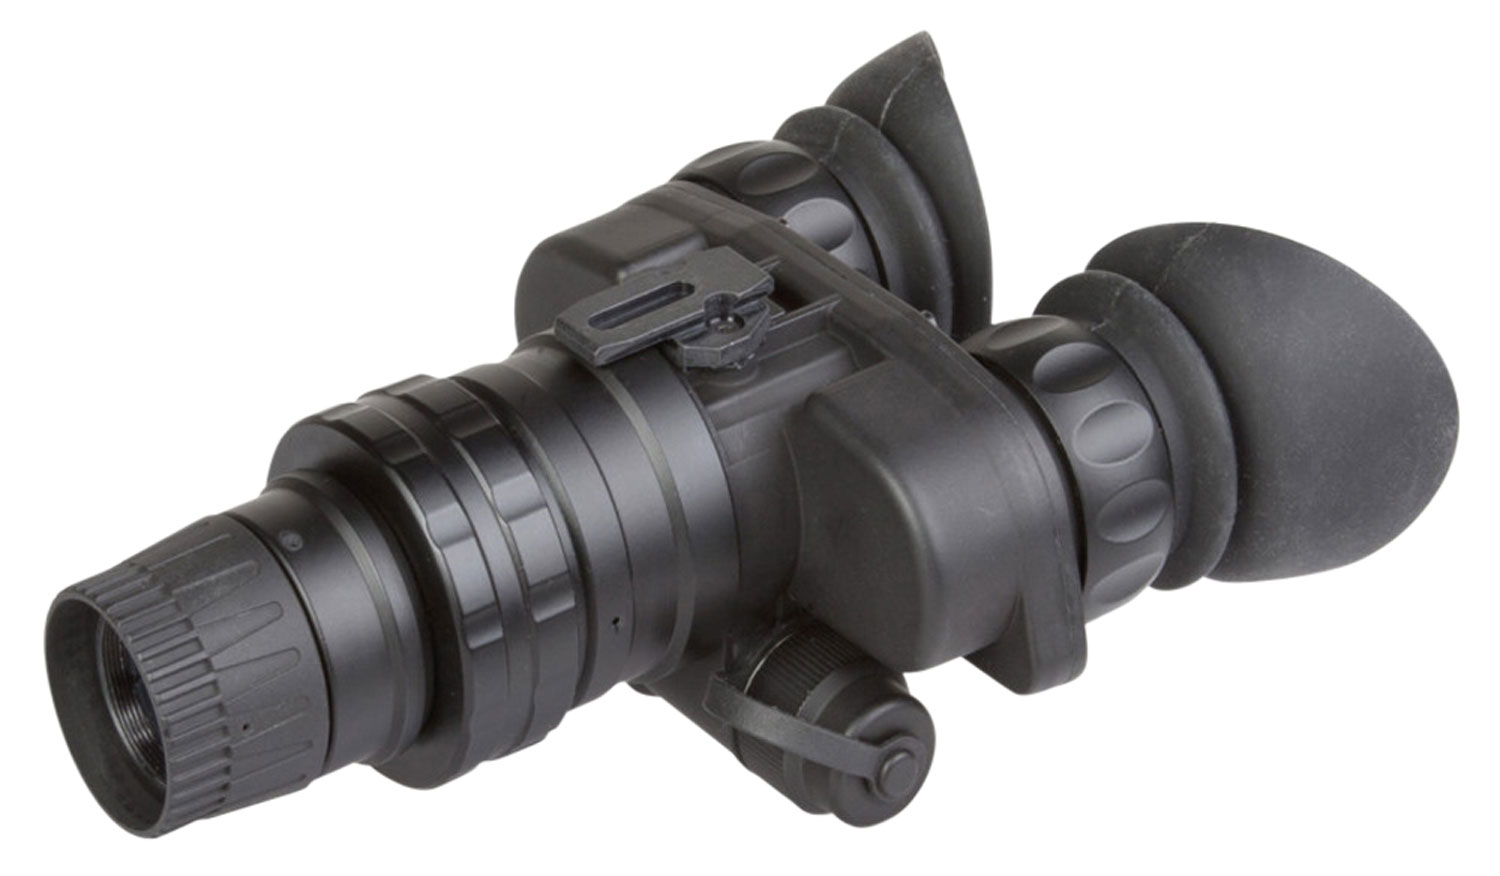 AGM Global Vision 12WO7122103031 Wolf-7 NL3 Night Vision Goggles Black 1x 24mm Generation 2+ Level 3 45-51 lp/mm Resolution